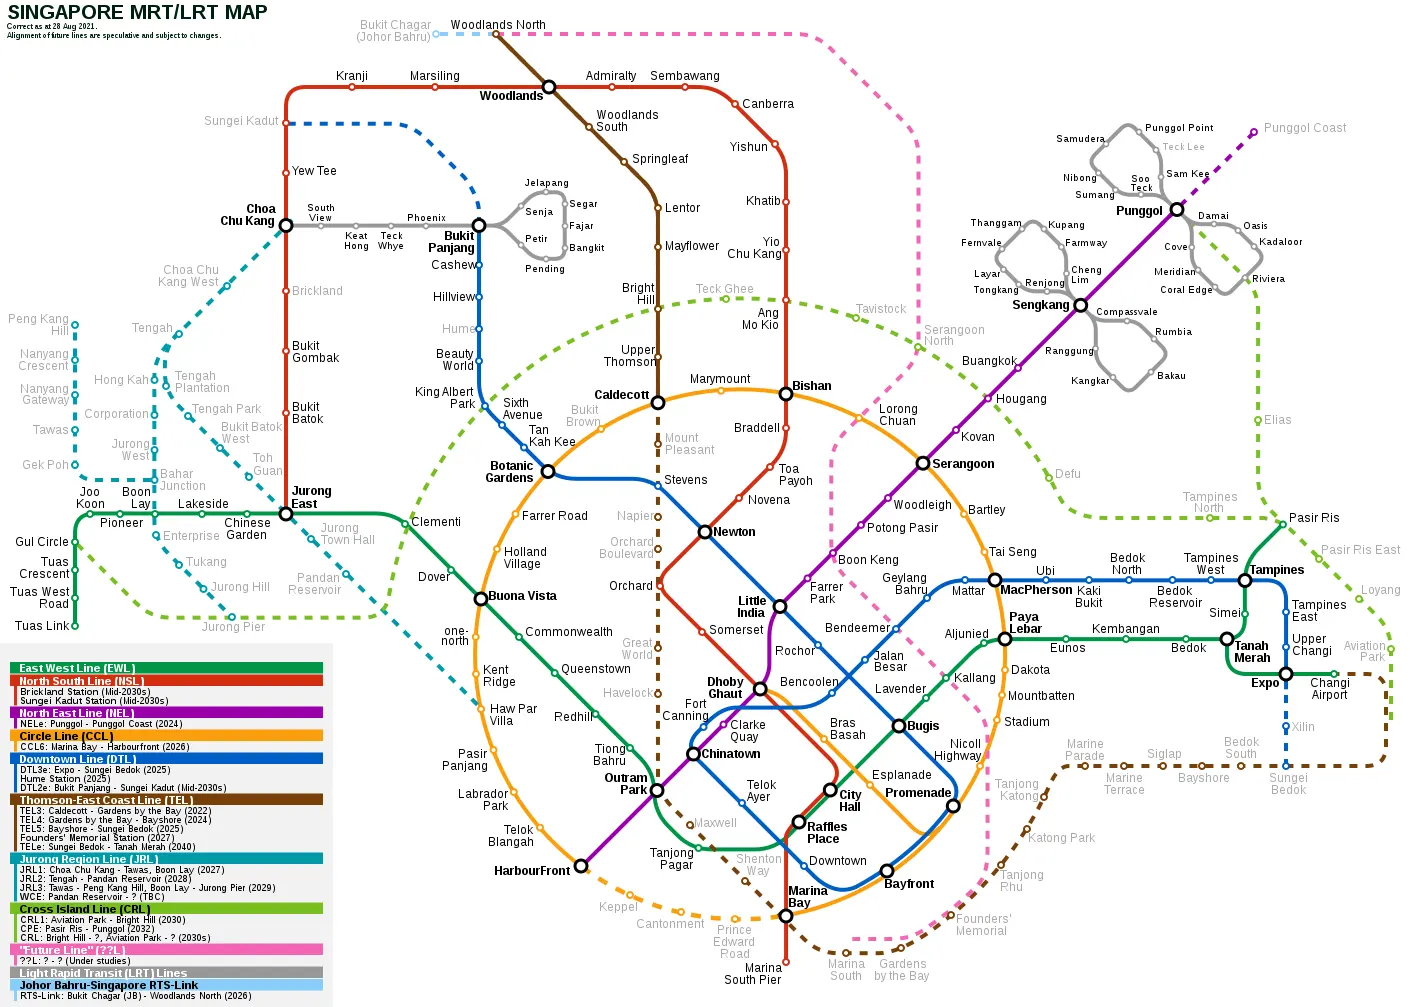 Tan Kah Kee MRT and its links to the rest of Singapore MRT lines